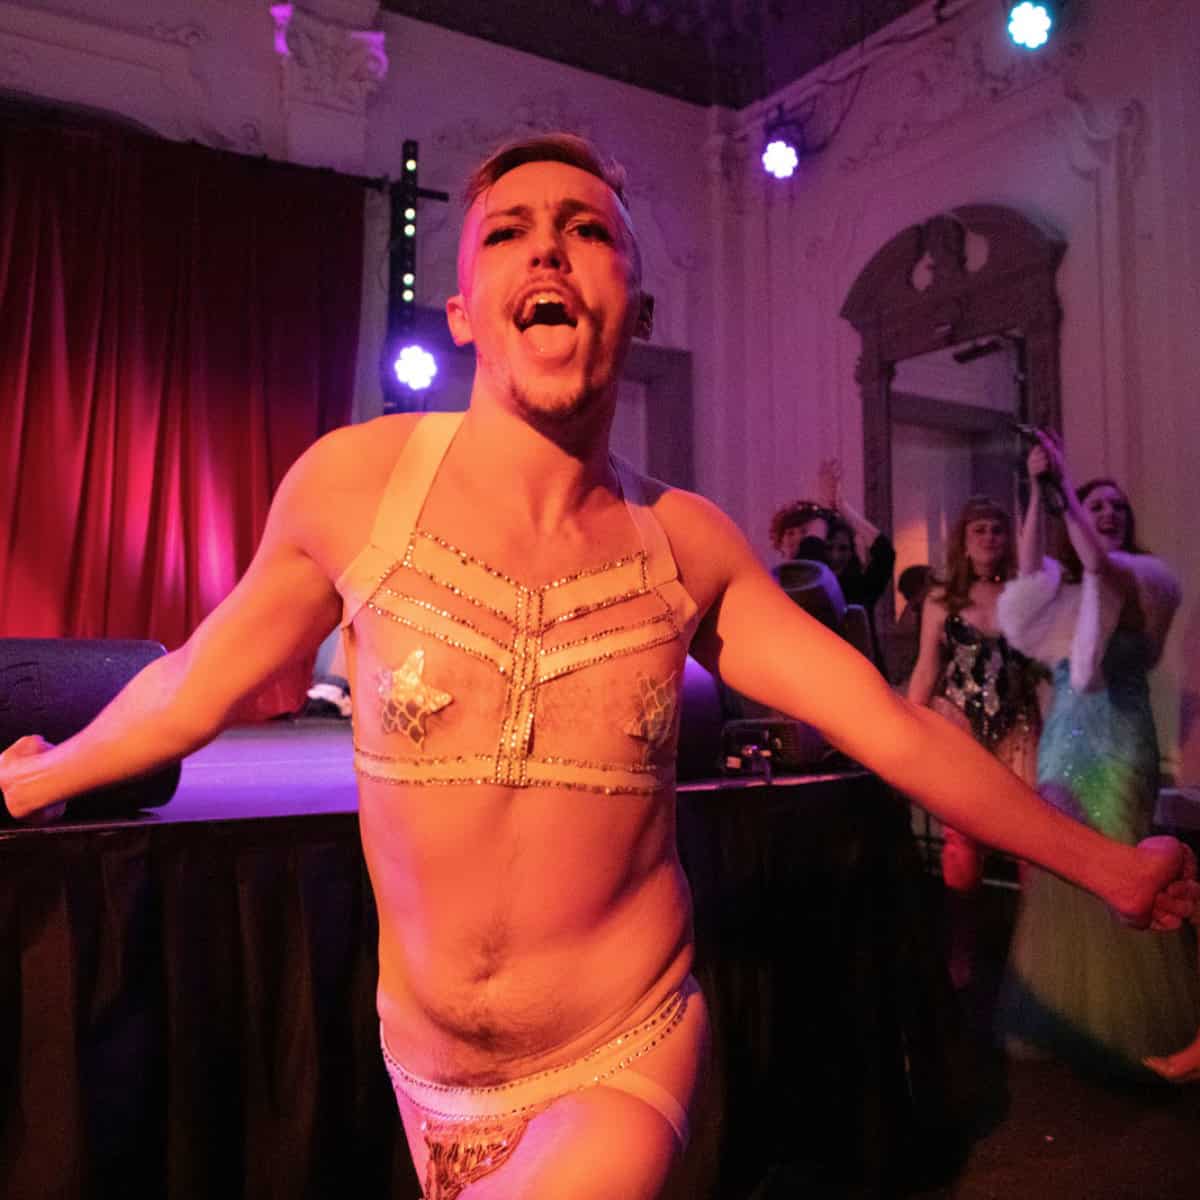 A Boylesque dancer on the stage